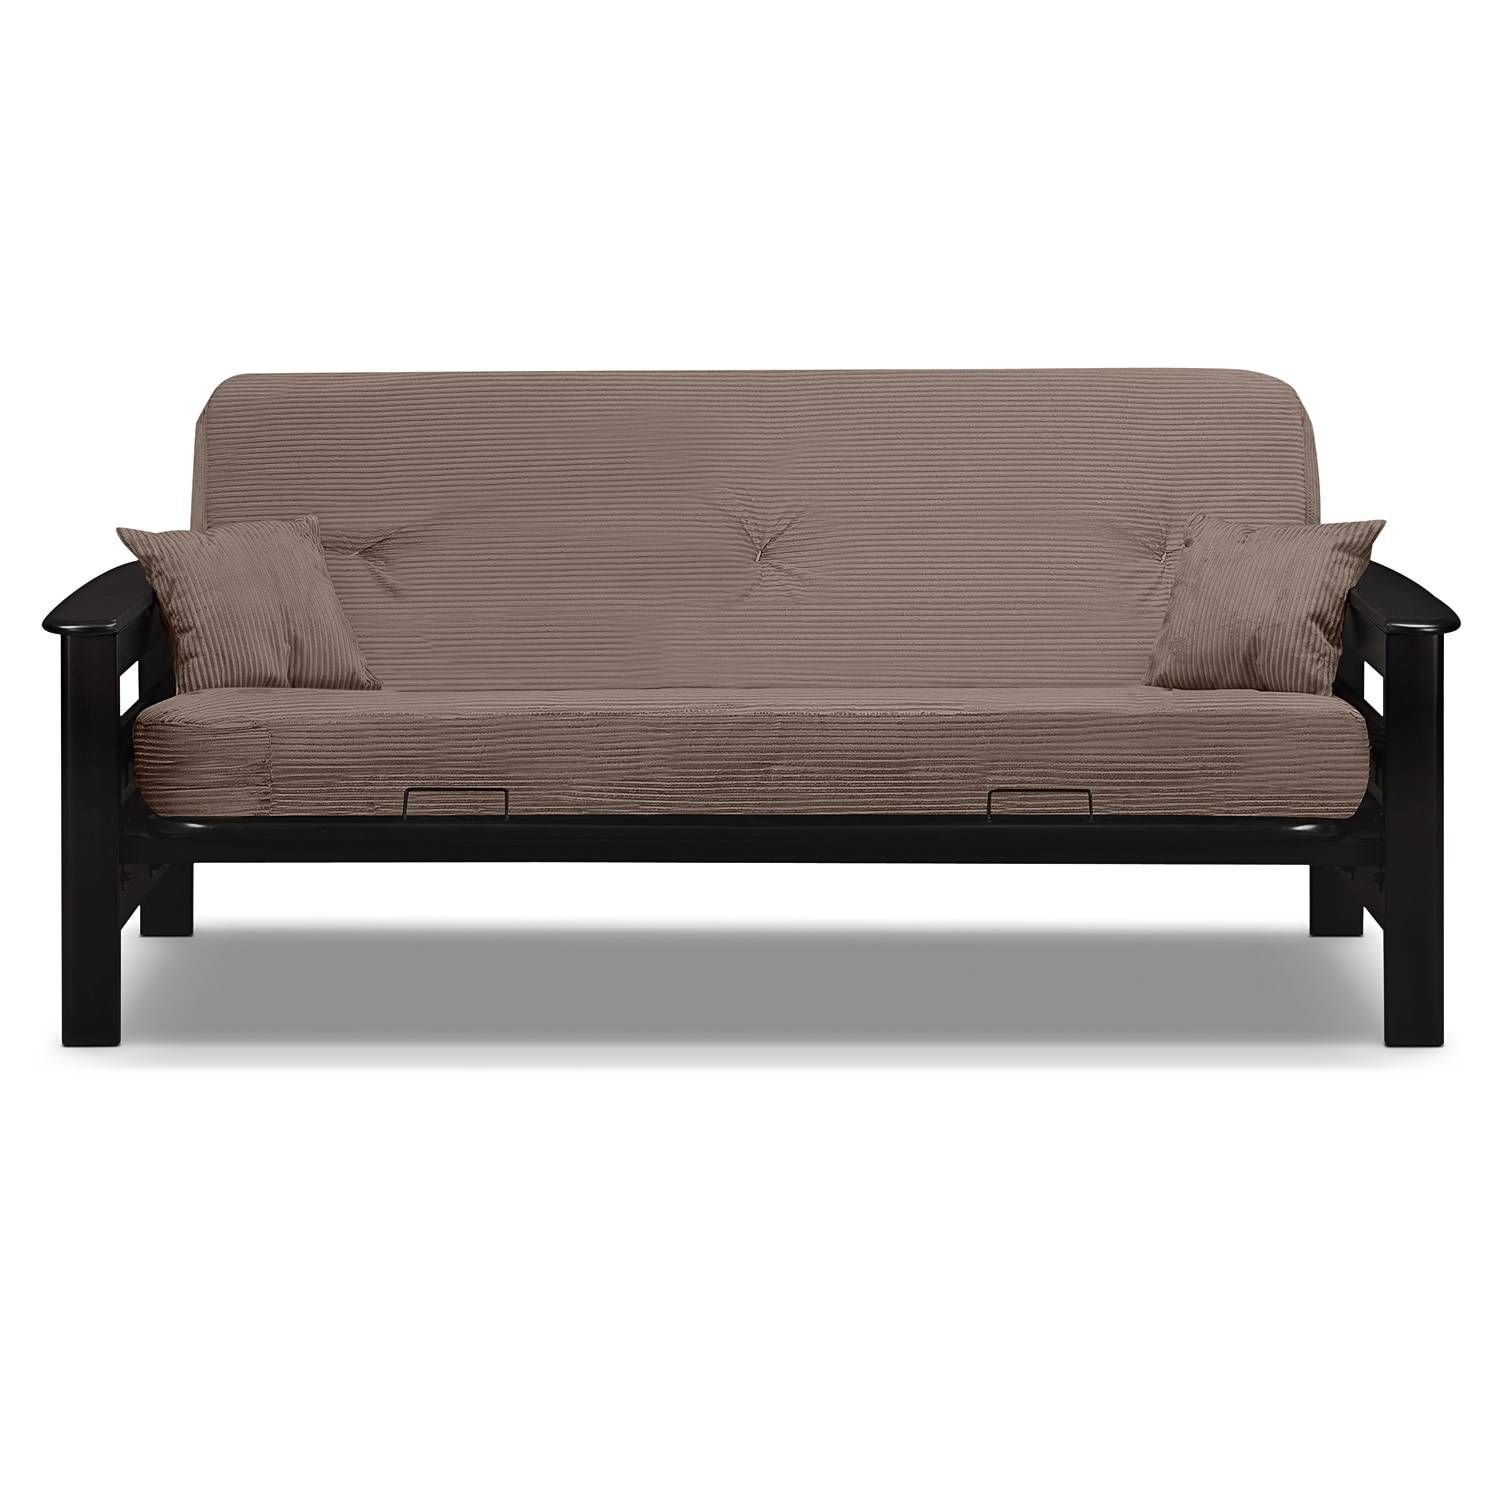 Tampa Futon Sofa Bed – Beige | Value City Furniture With Regard To Sofas Tampa (View 5 of 25)